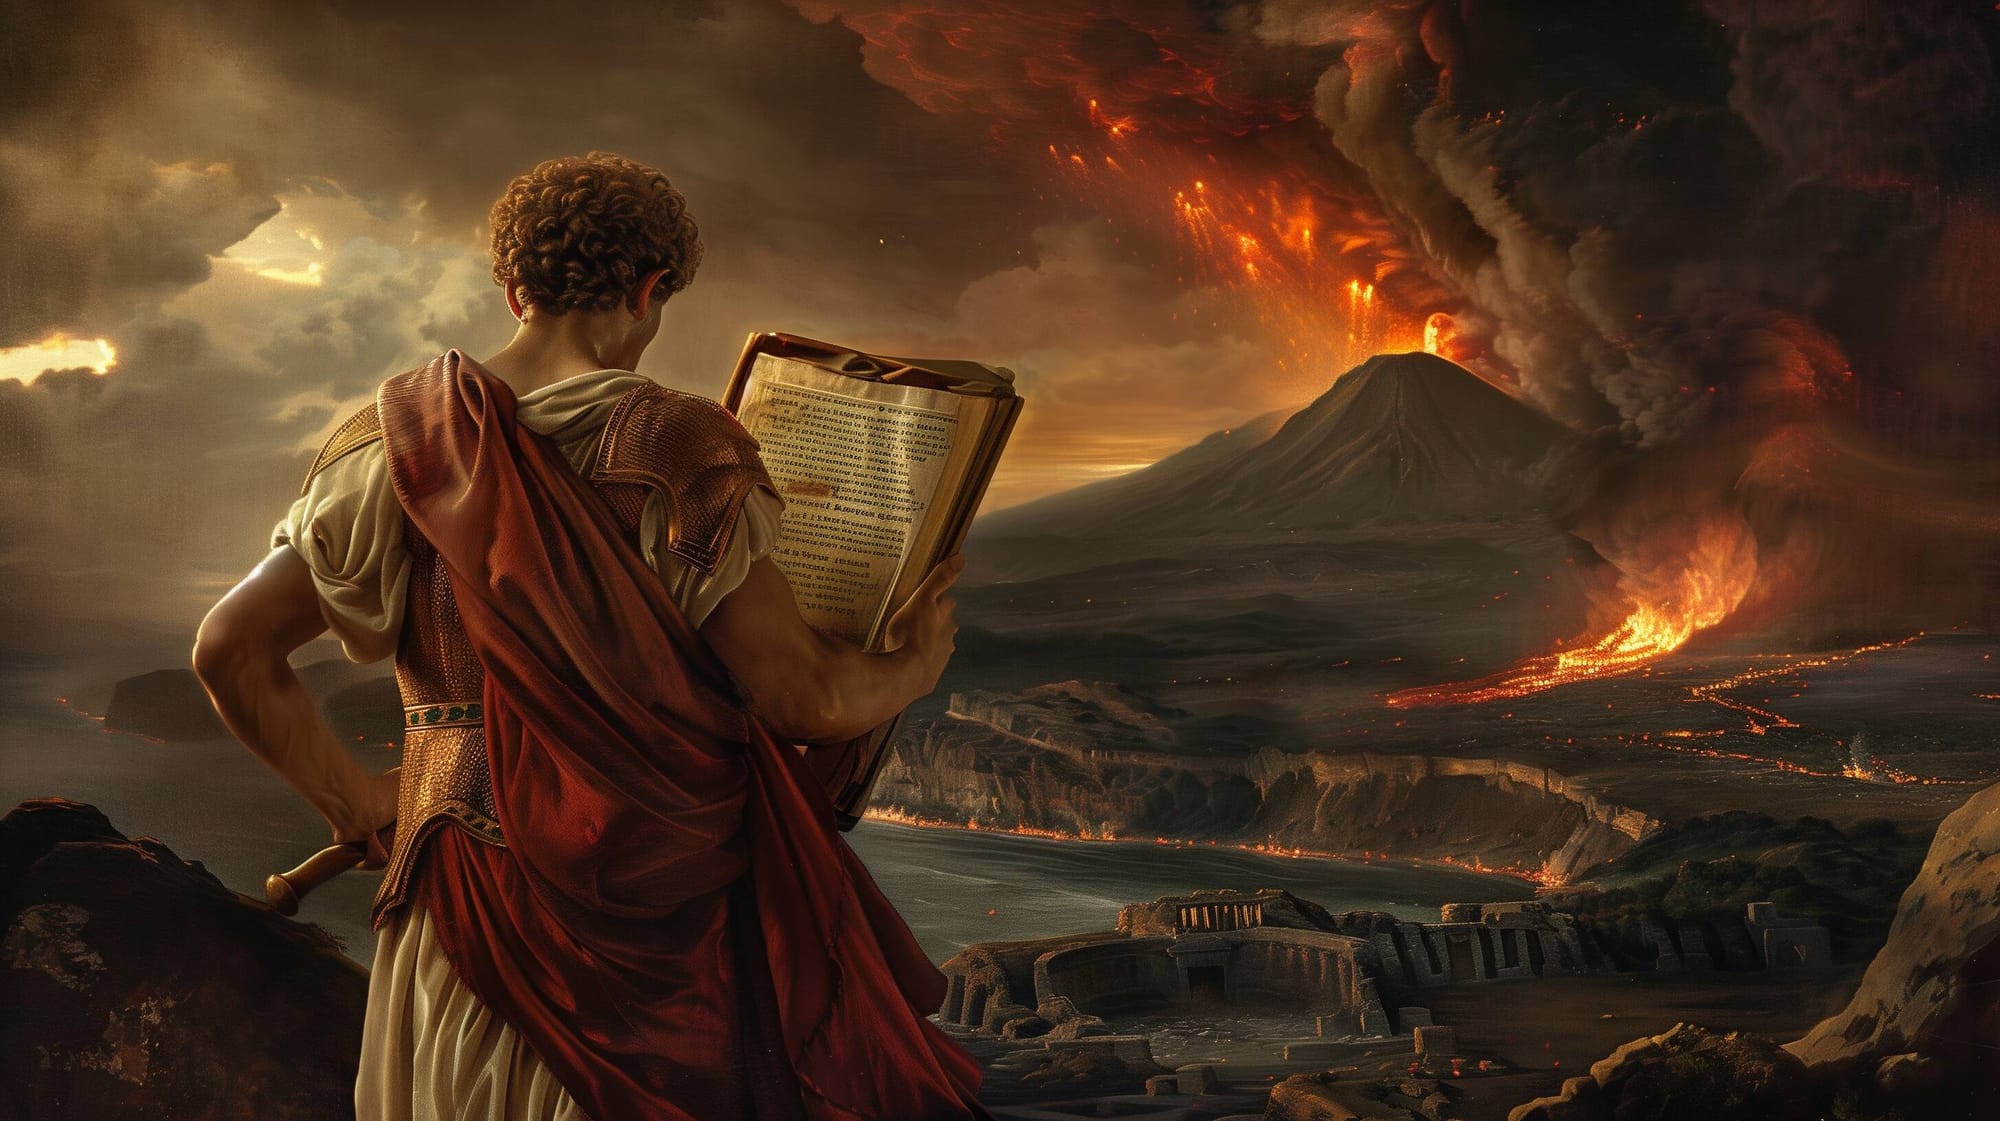 Pliny the Younger fleeing Pompeii after Vesuvius erupted, saving his scrolls and recording the incident